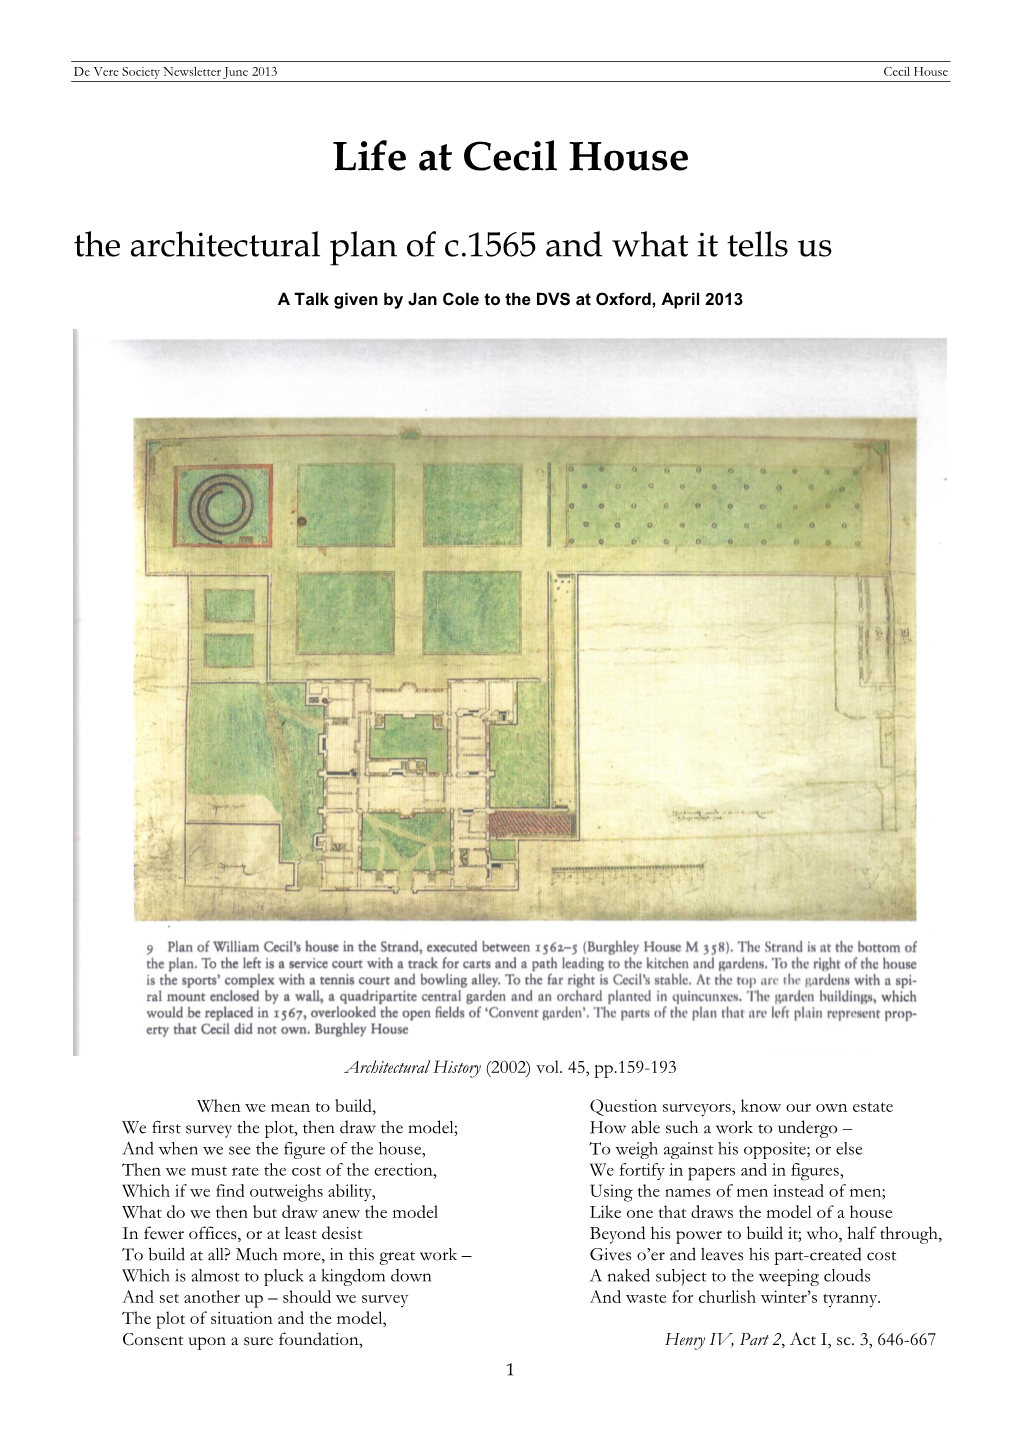 Life at Cecil House the Architectural Plan of C.1565 and What It Tells Us